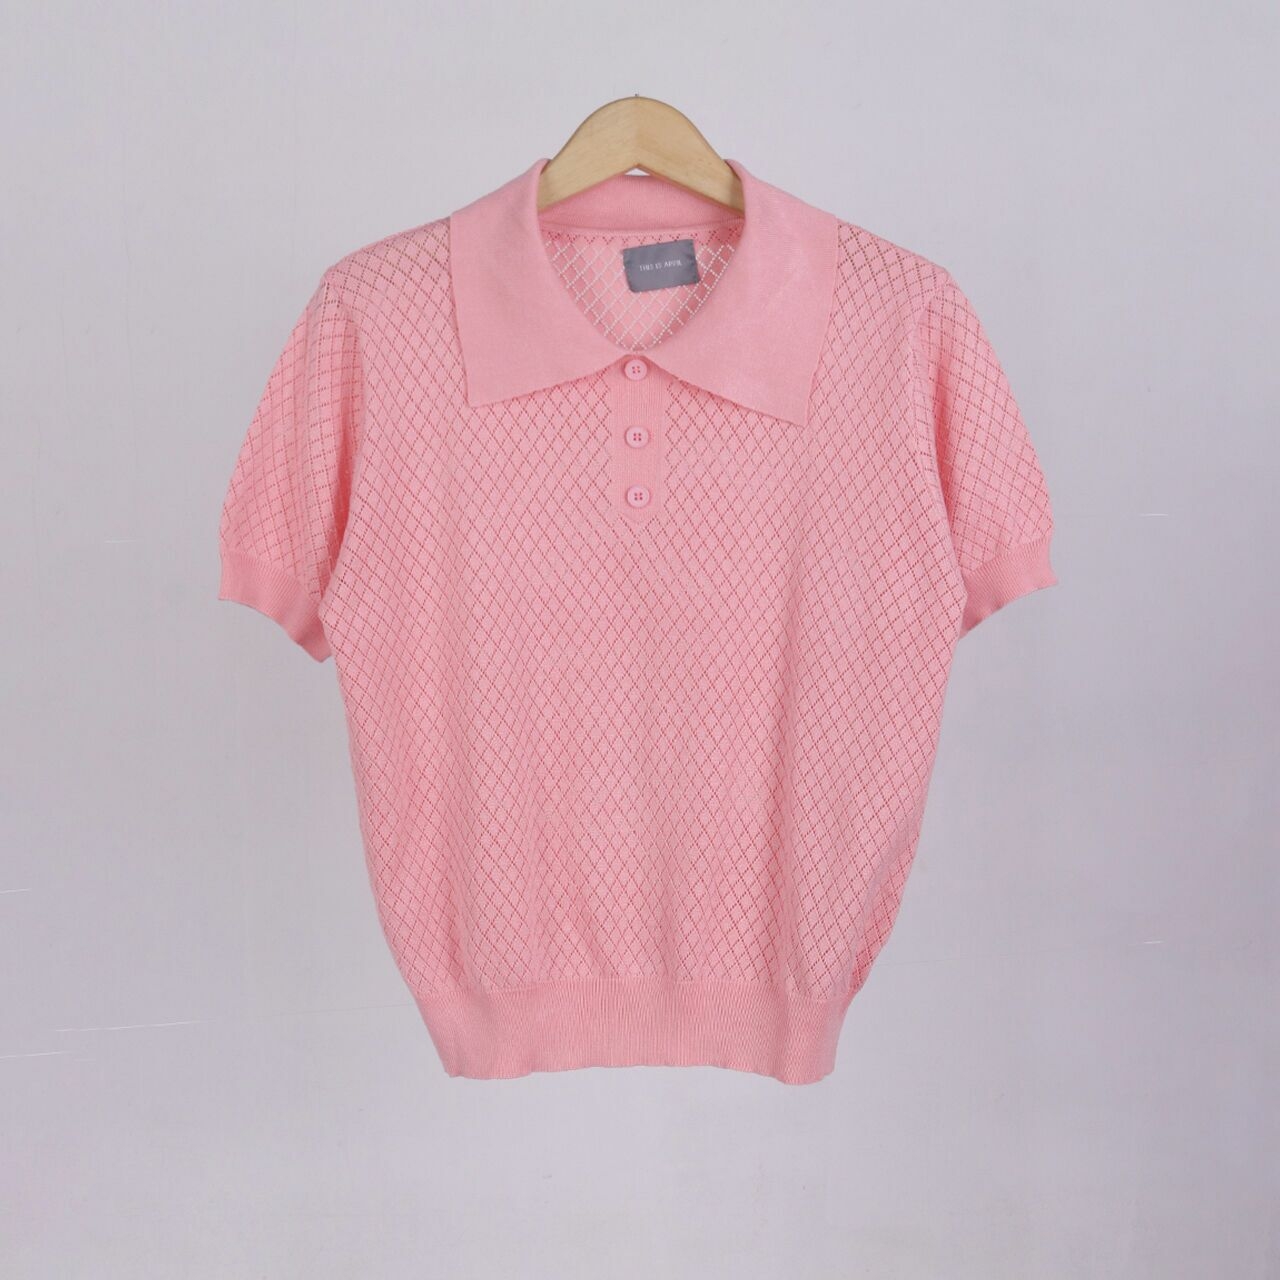 This is April Pink Blouse